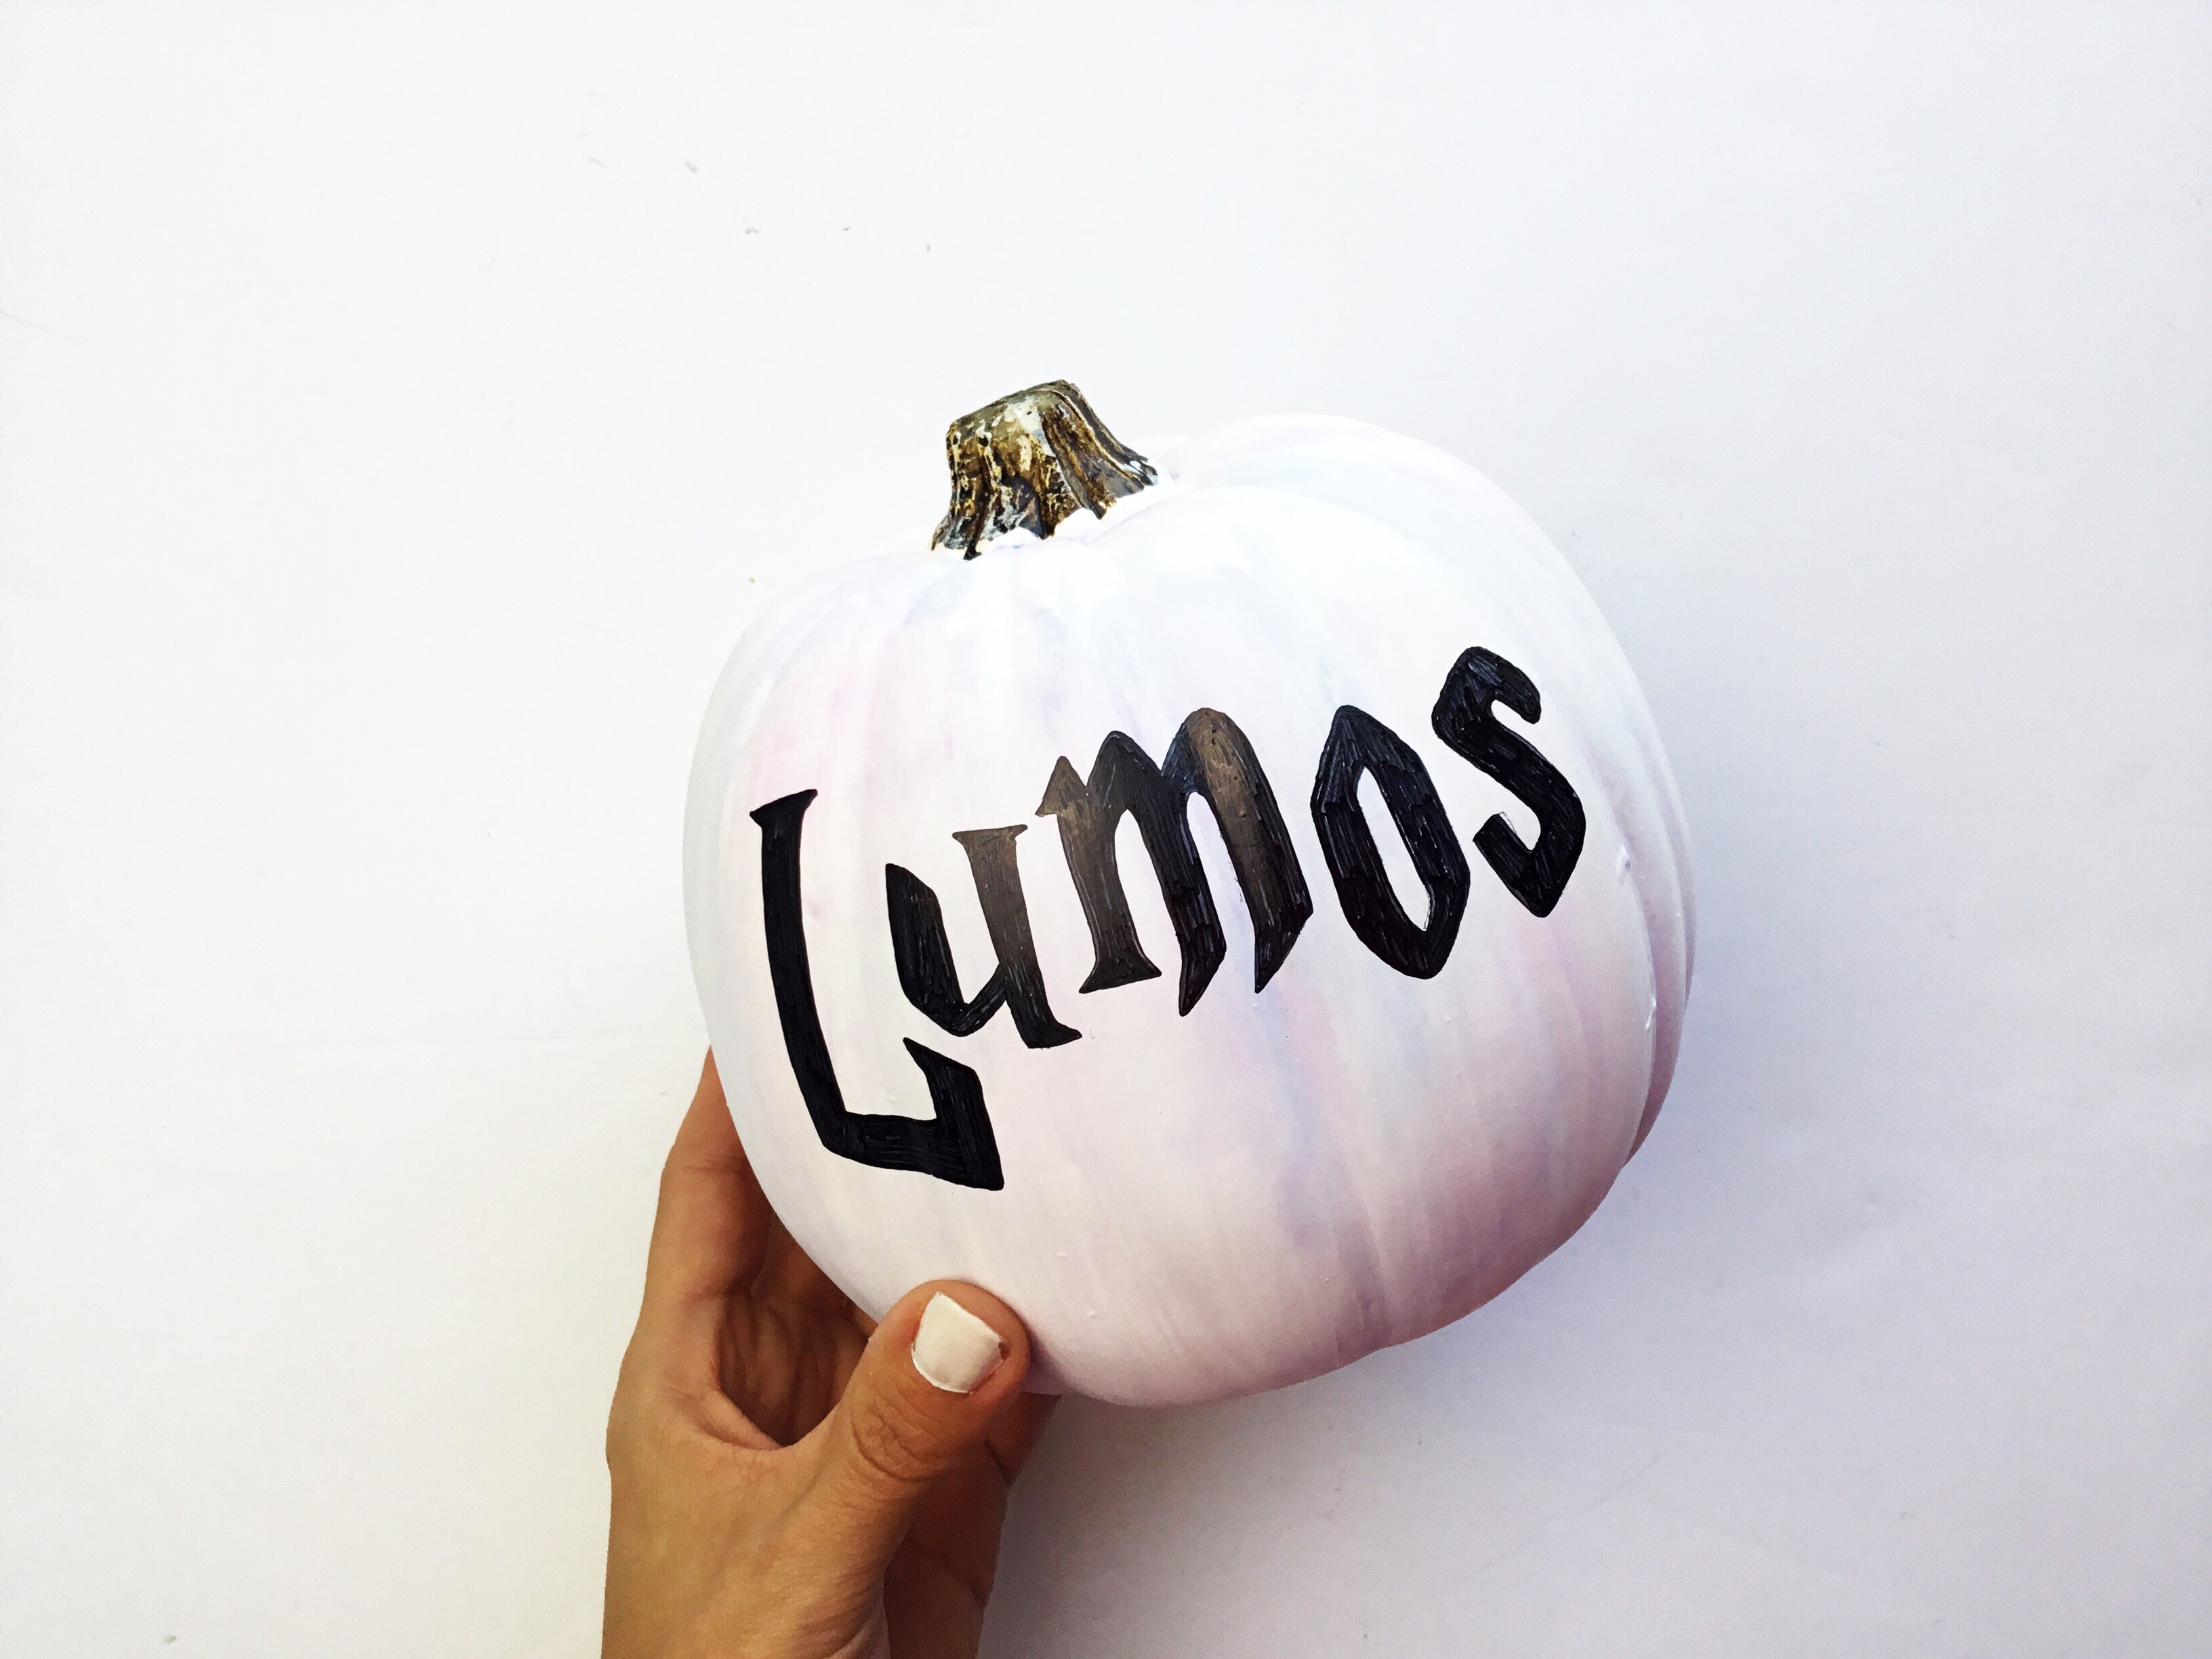 DIY Harry Potter pumpkin | how to create your own Harry Potter themed fall decor with #Tombow